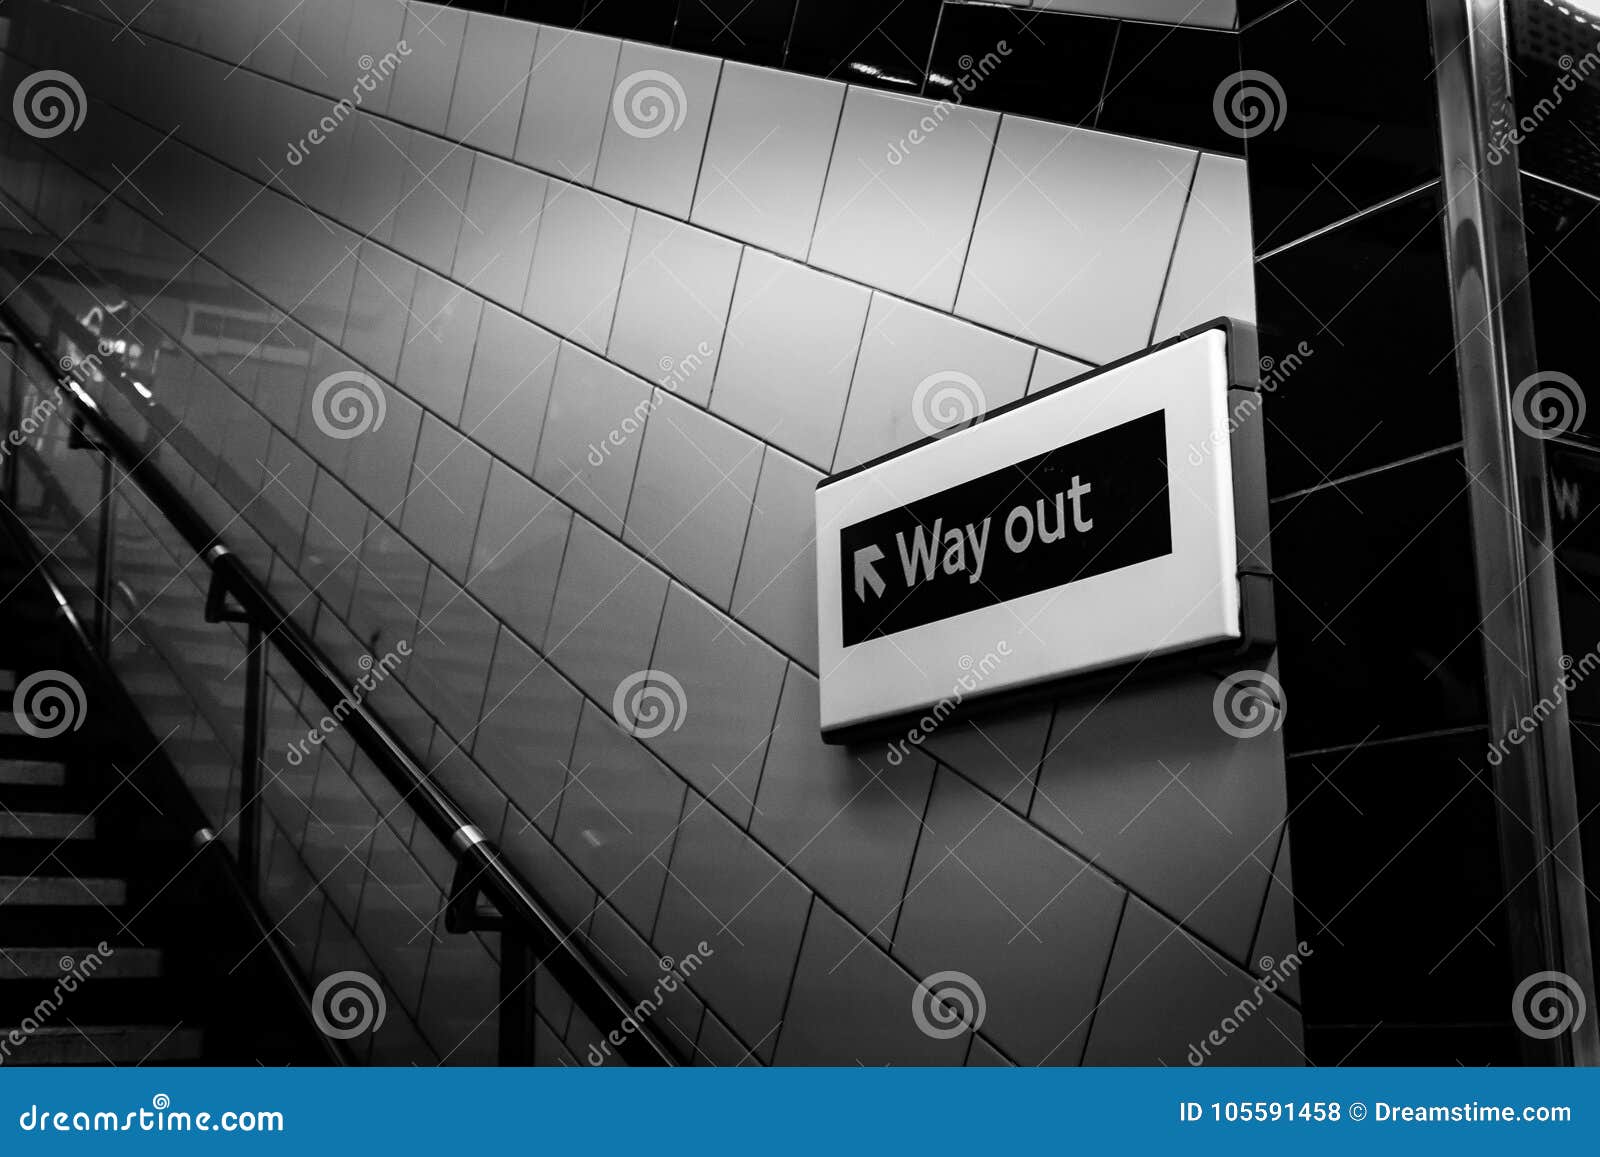 way out of the tube in london, england.